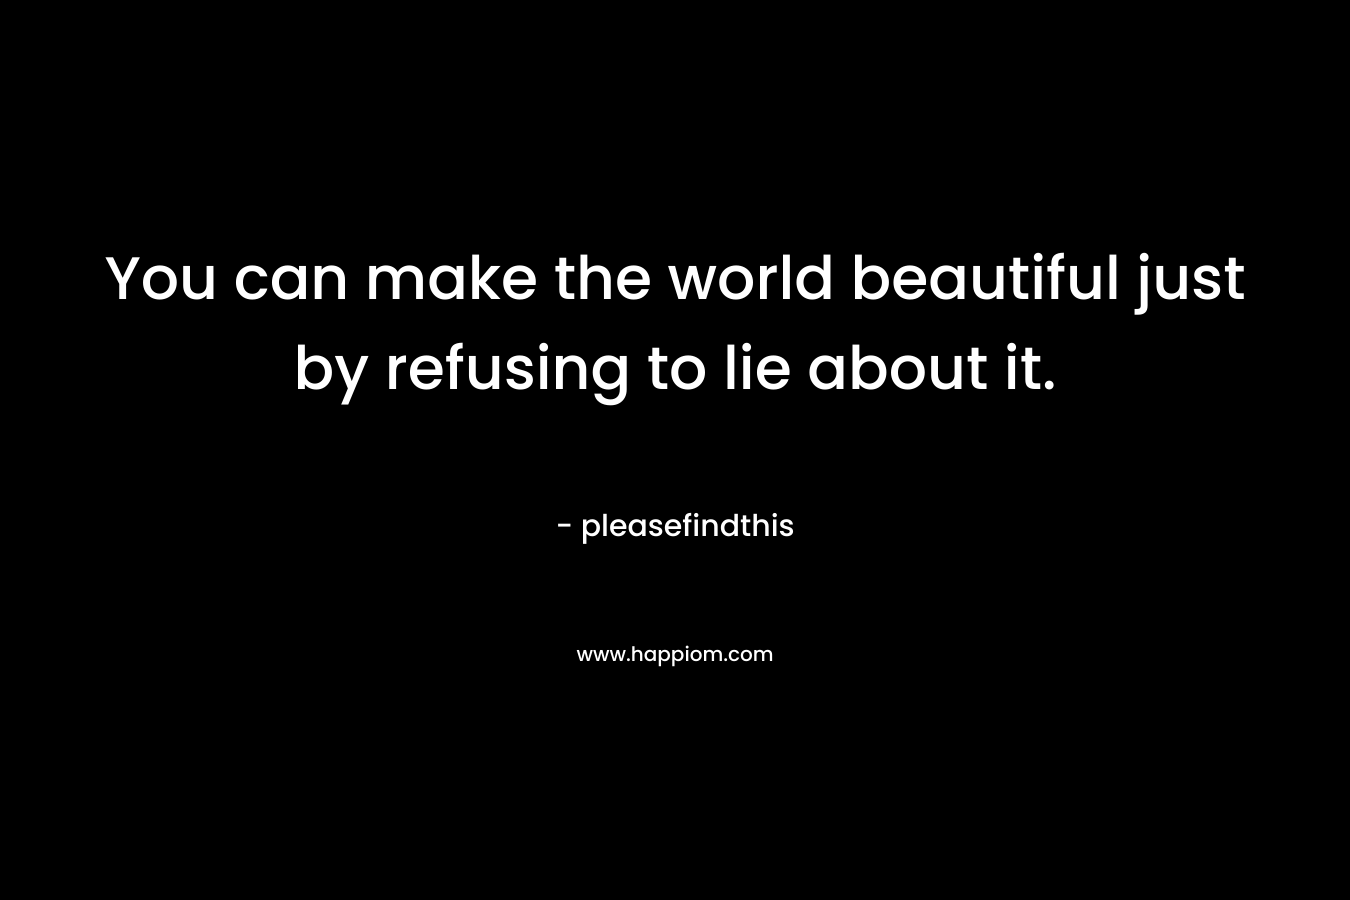 You can make the world beautiful just by refusing to lie about it. – pleasefindthis